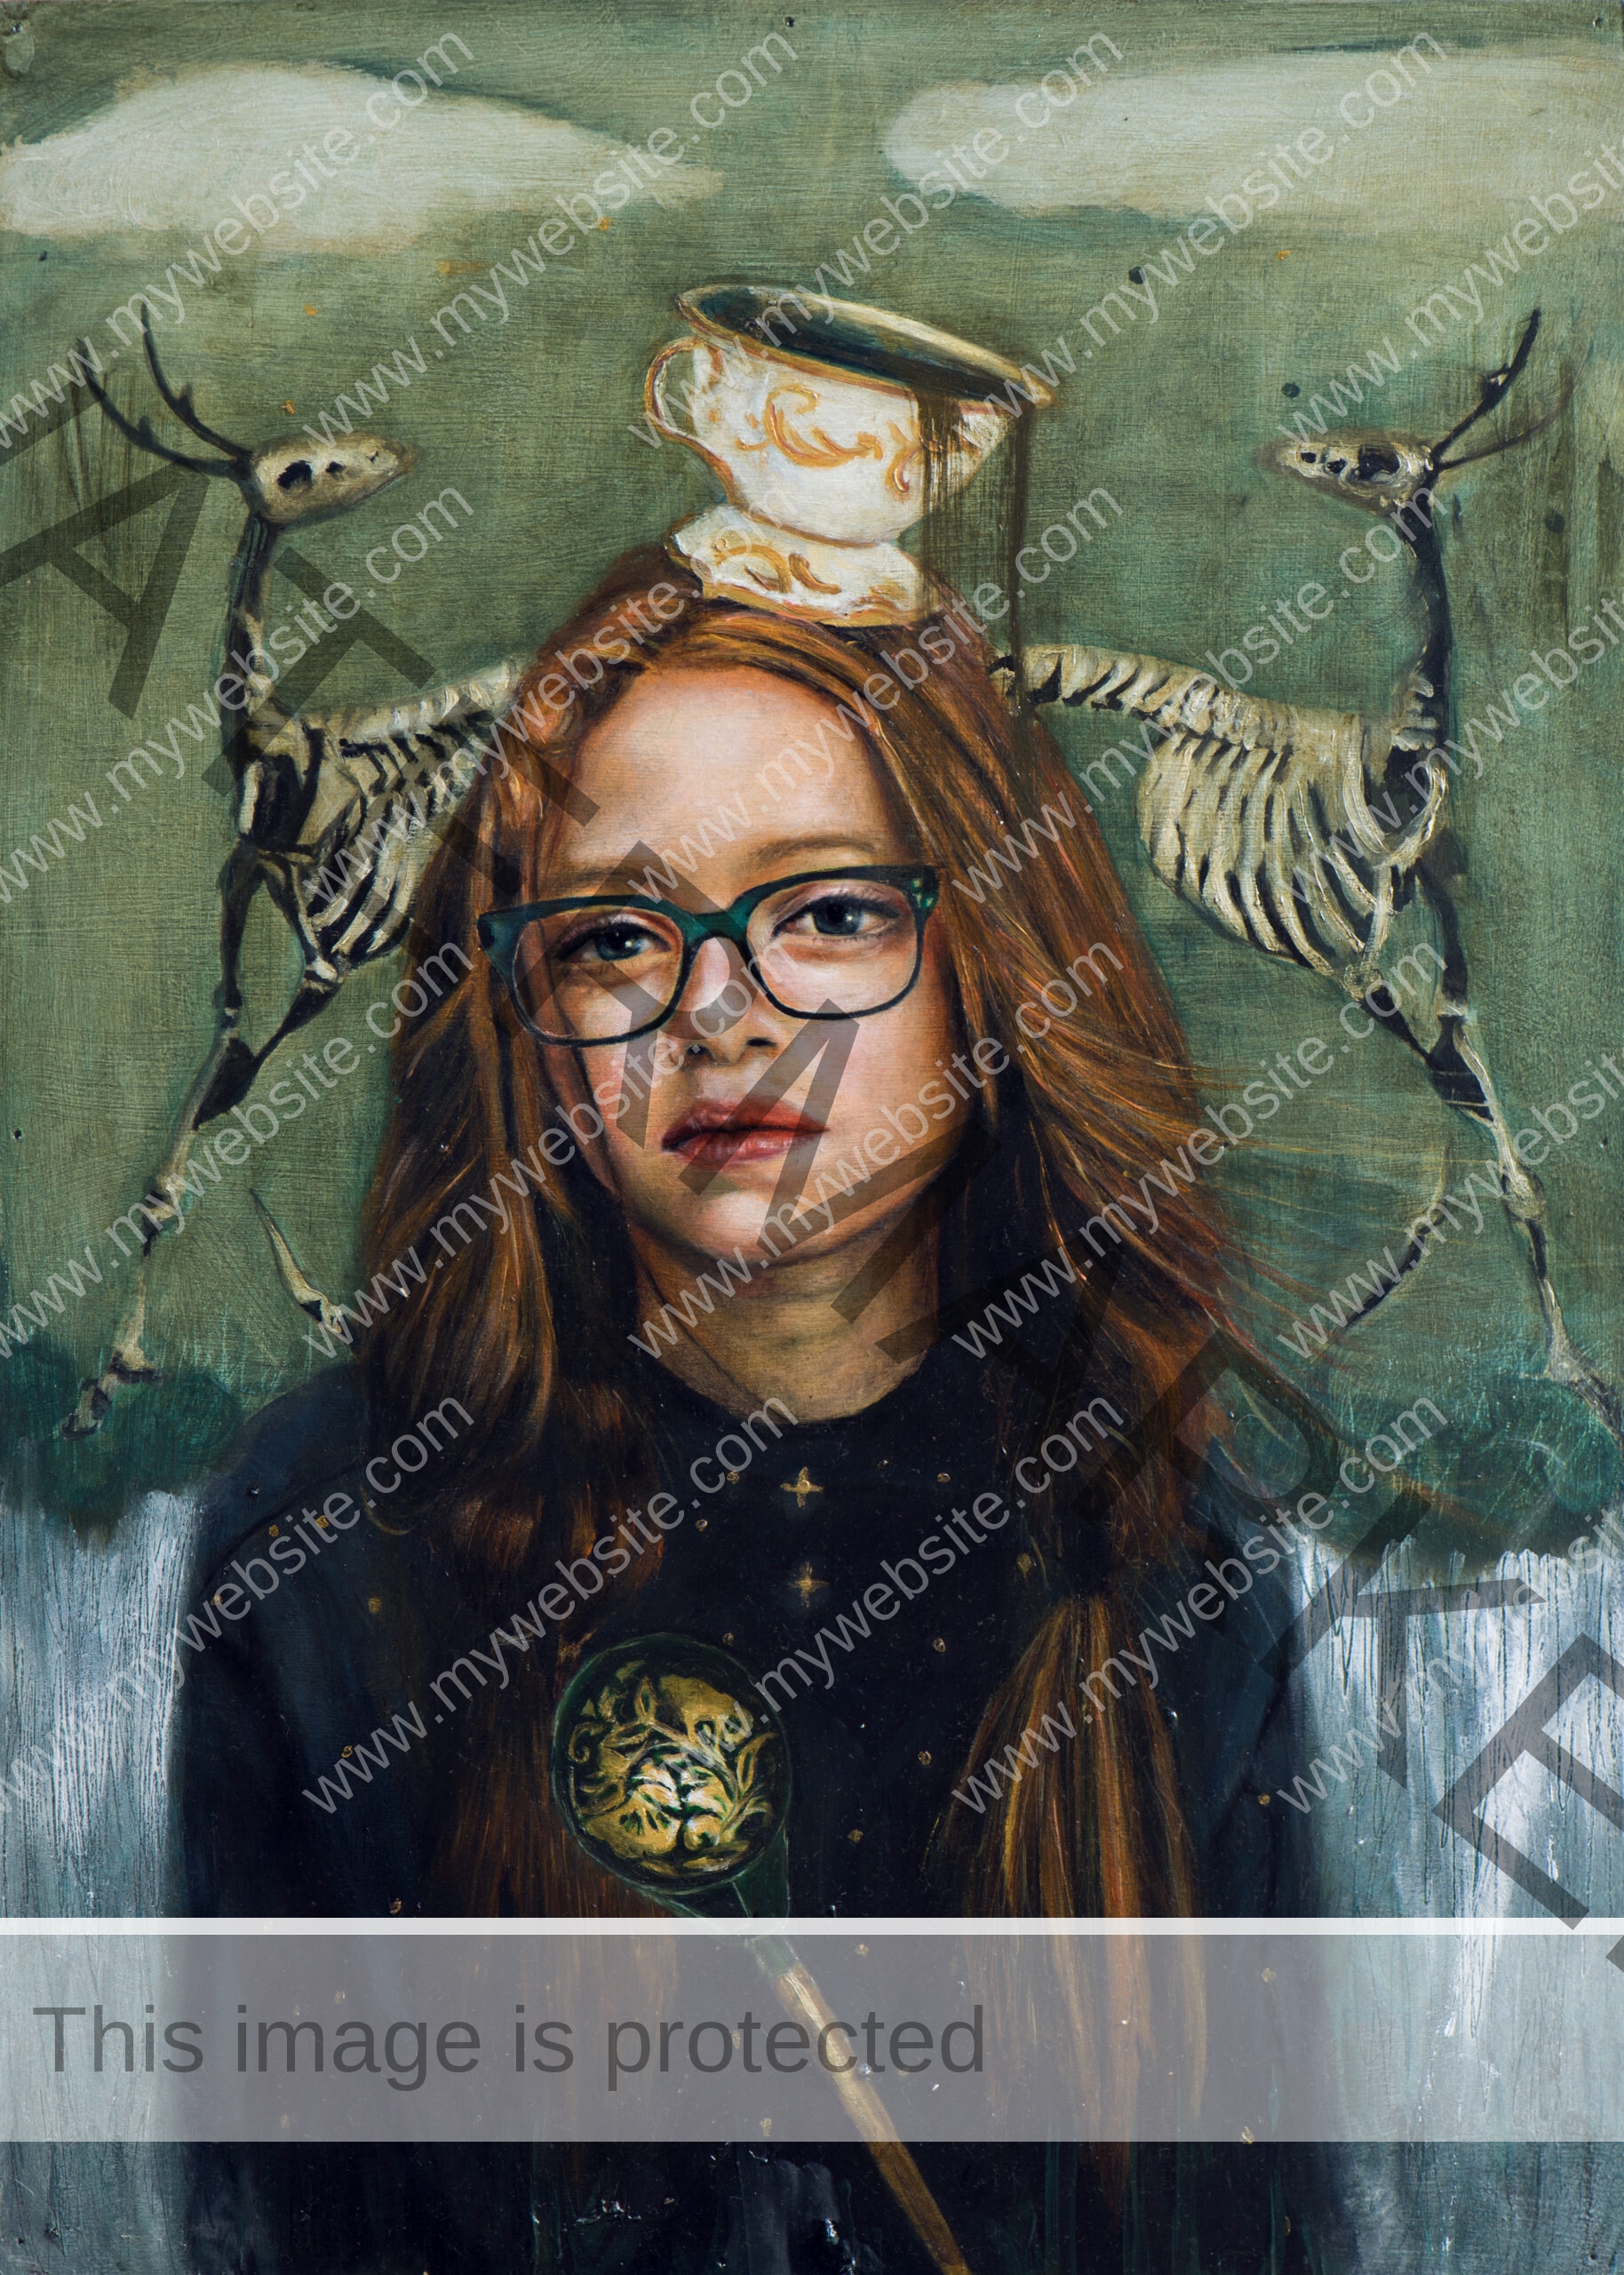 oil on wood panel painting by Sofía Ruiz of a young girl staring out of the canvas with two animal skeletons behind her. The painting is dreamlike and quite sinister, evoking feelings of unease.